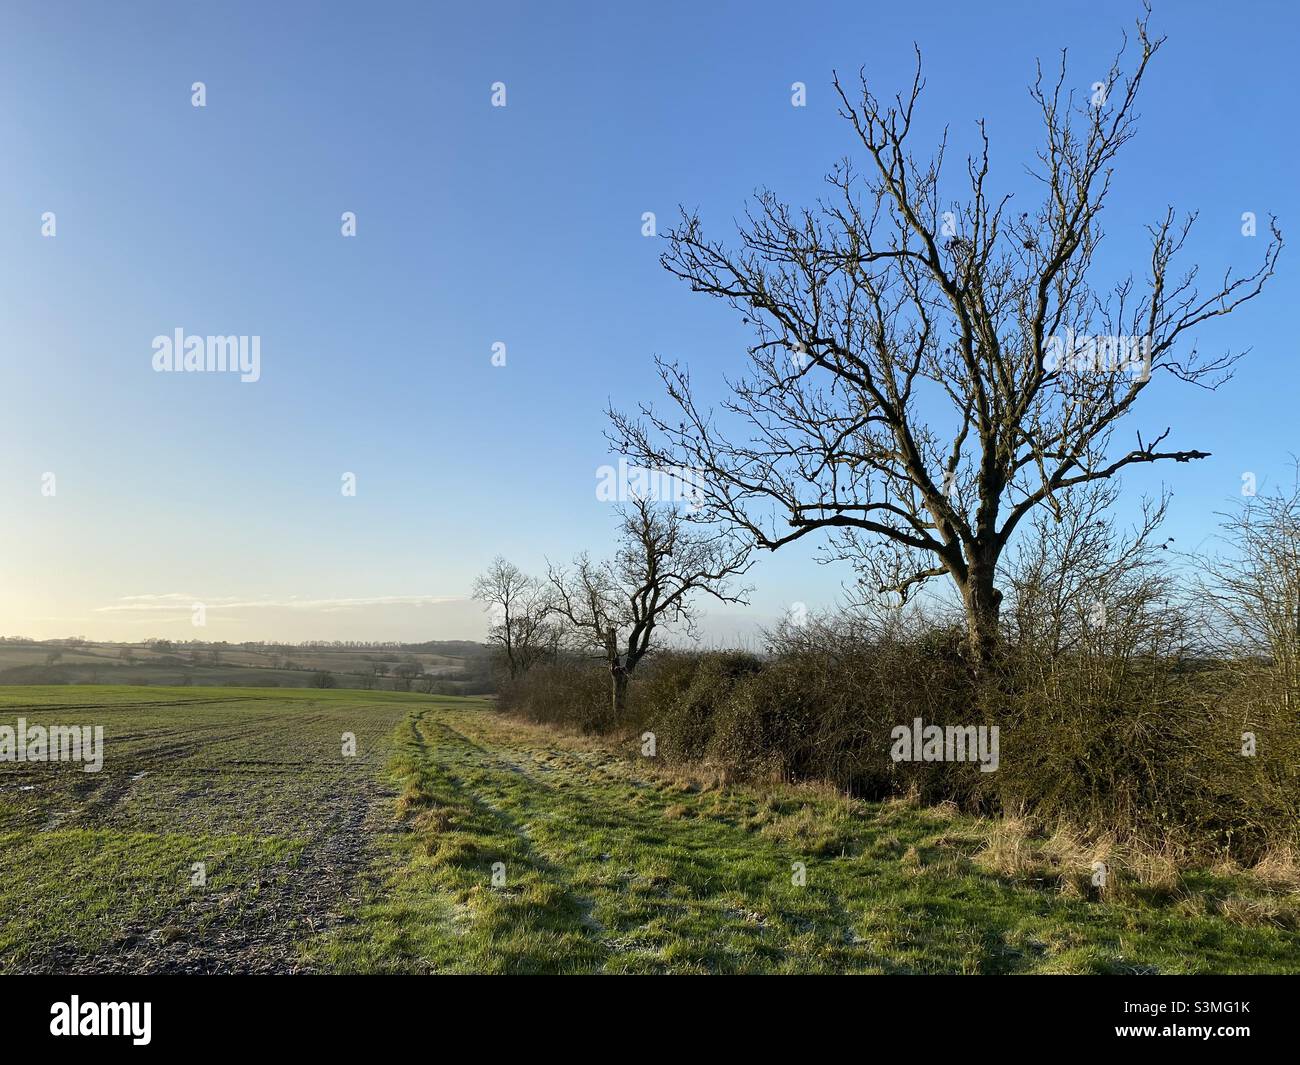 View over a field in the countryside with a bright blue sky Stock Photo